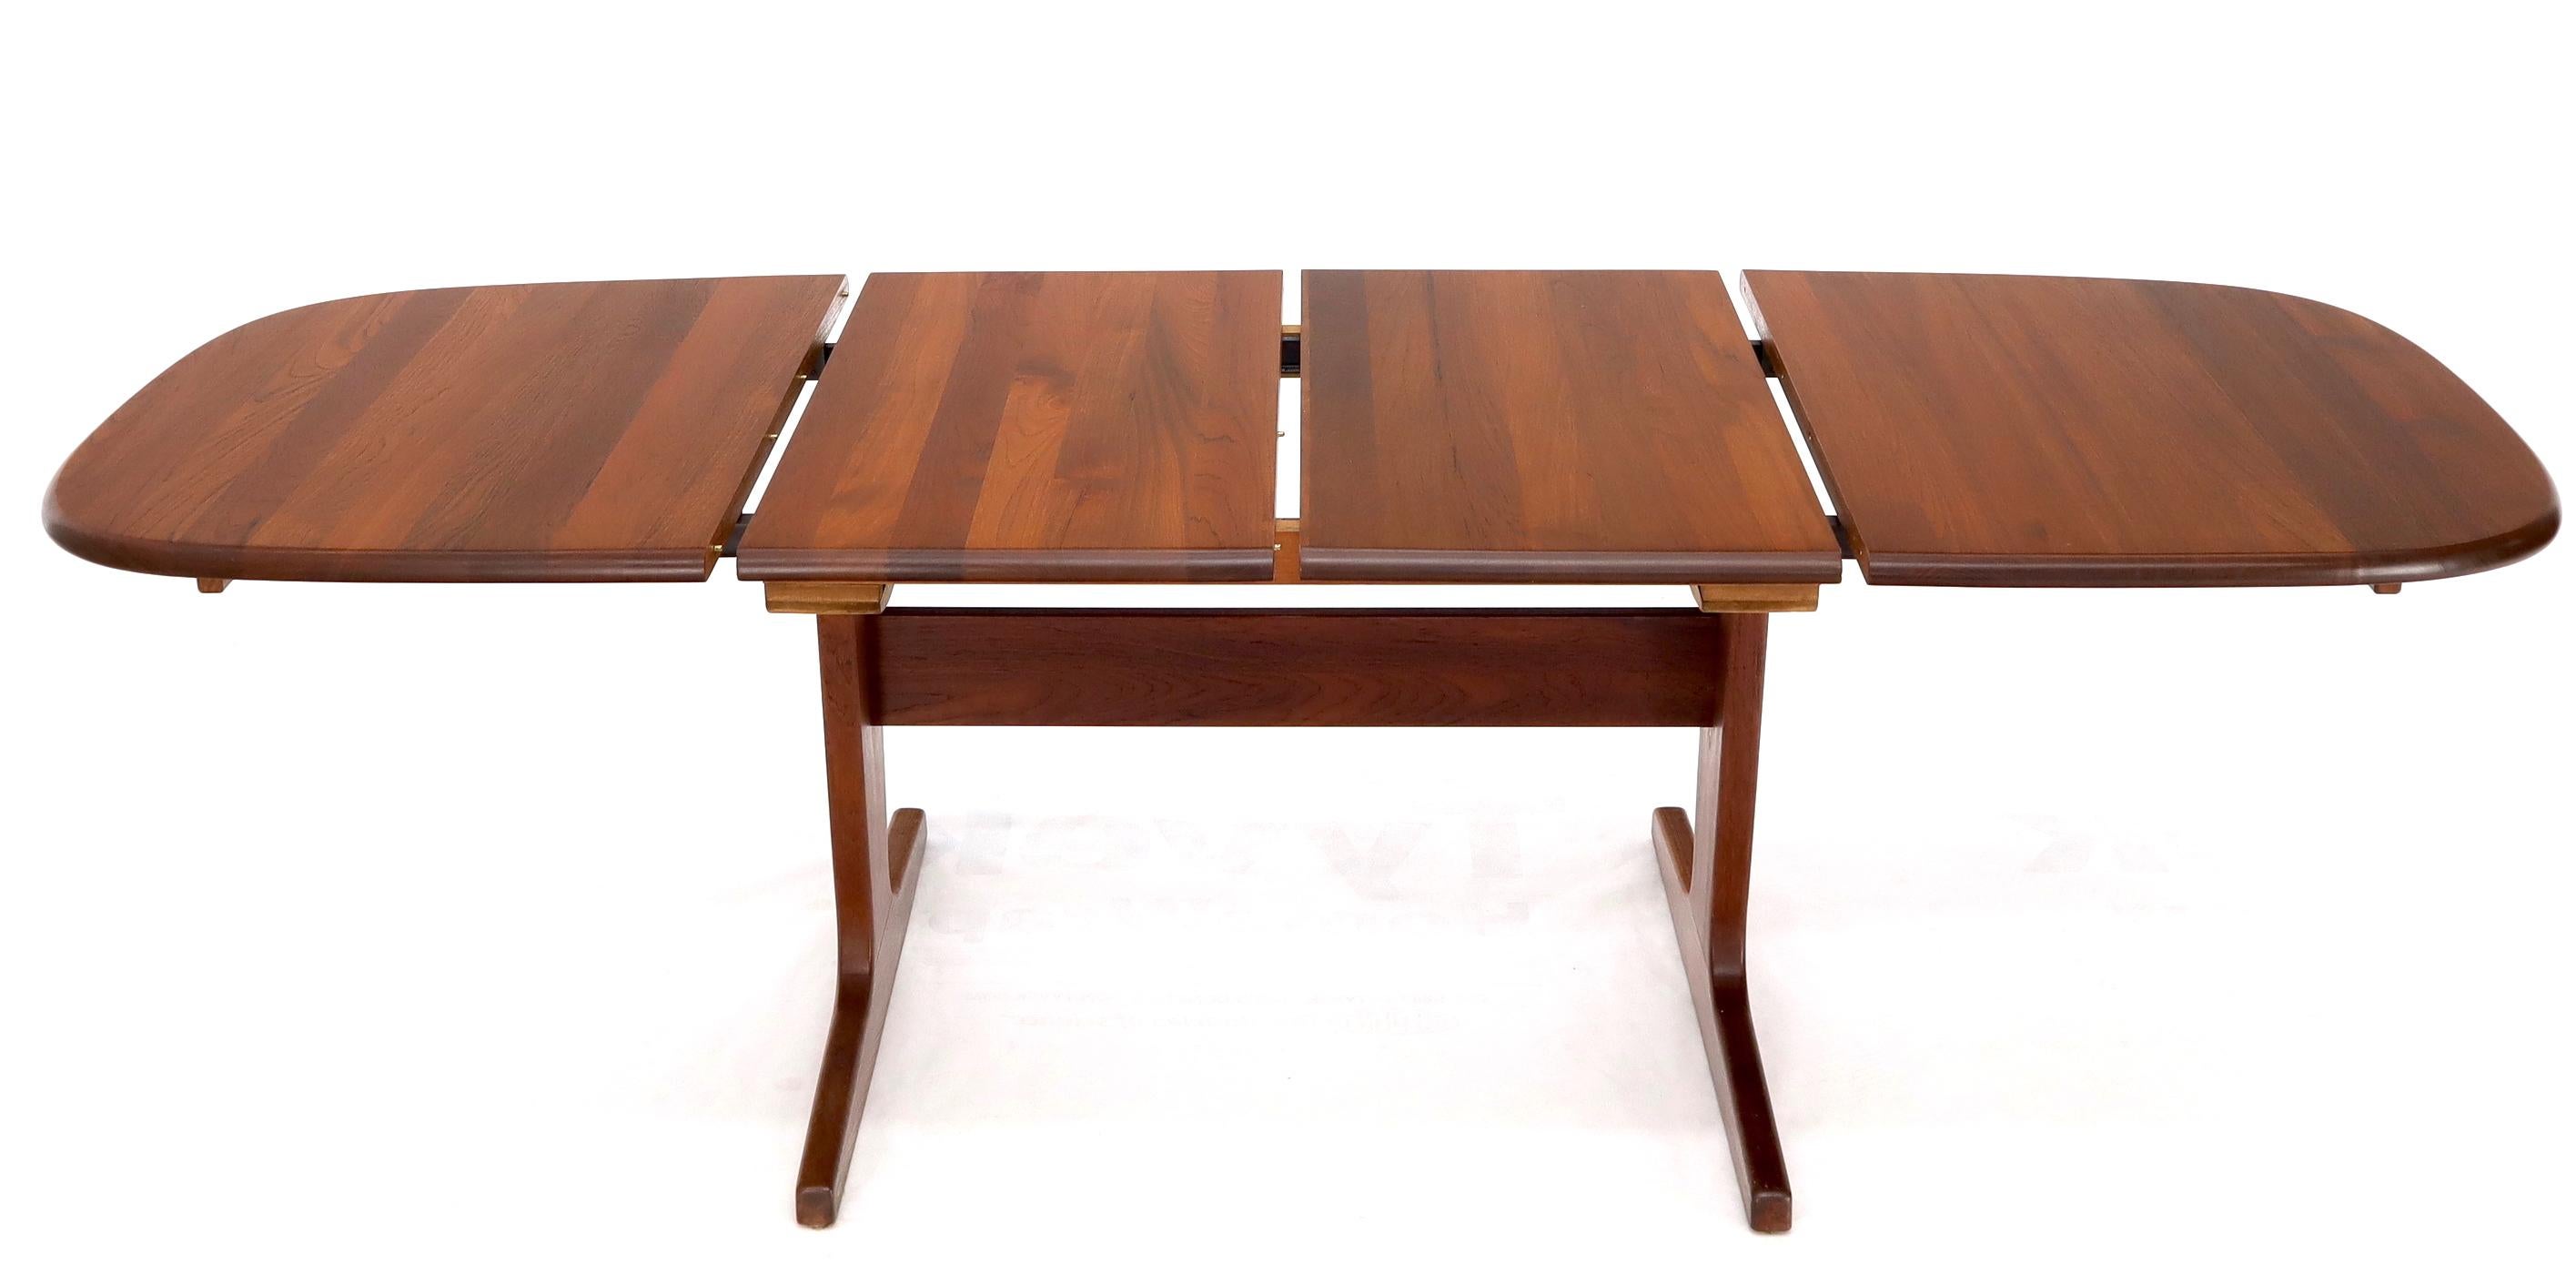 Compact Solid Teak Danish Mid-Century Modern Dining Table with Two Leaves For Sale 3